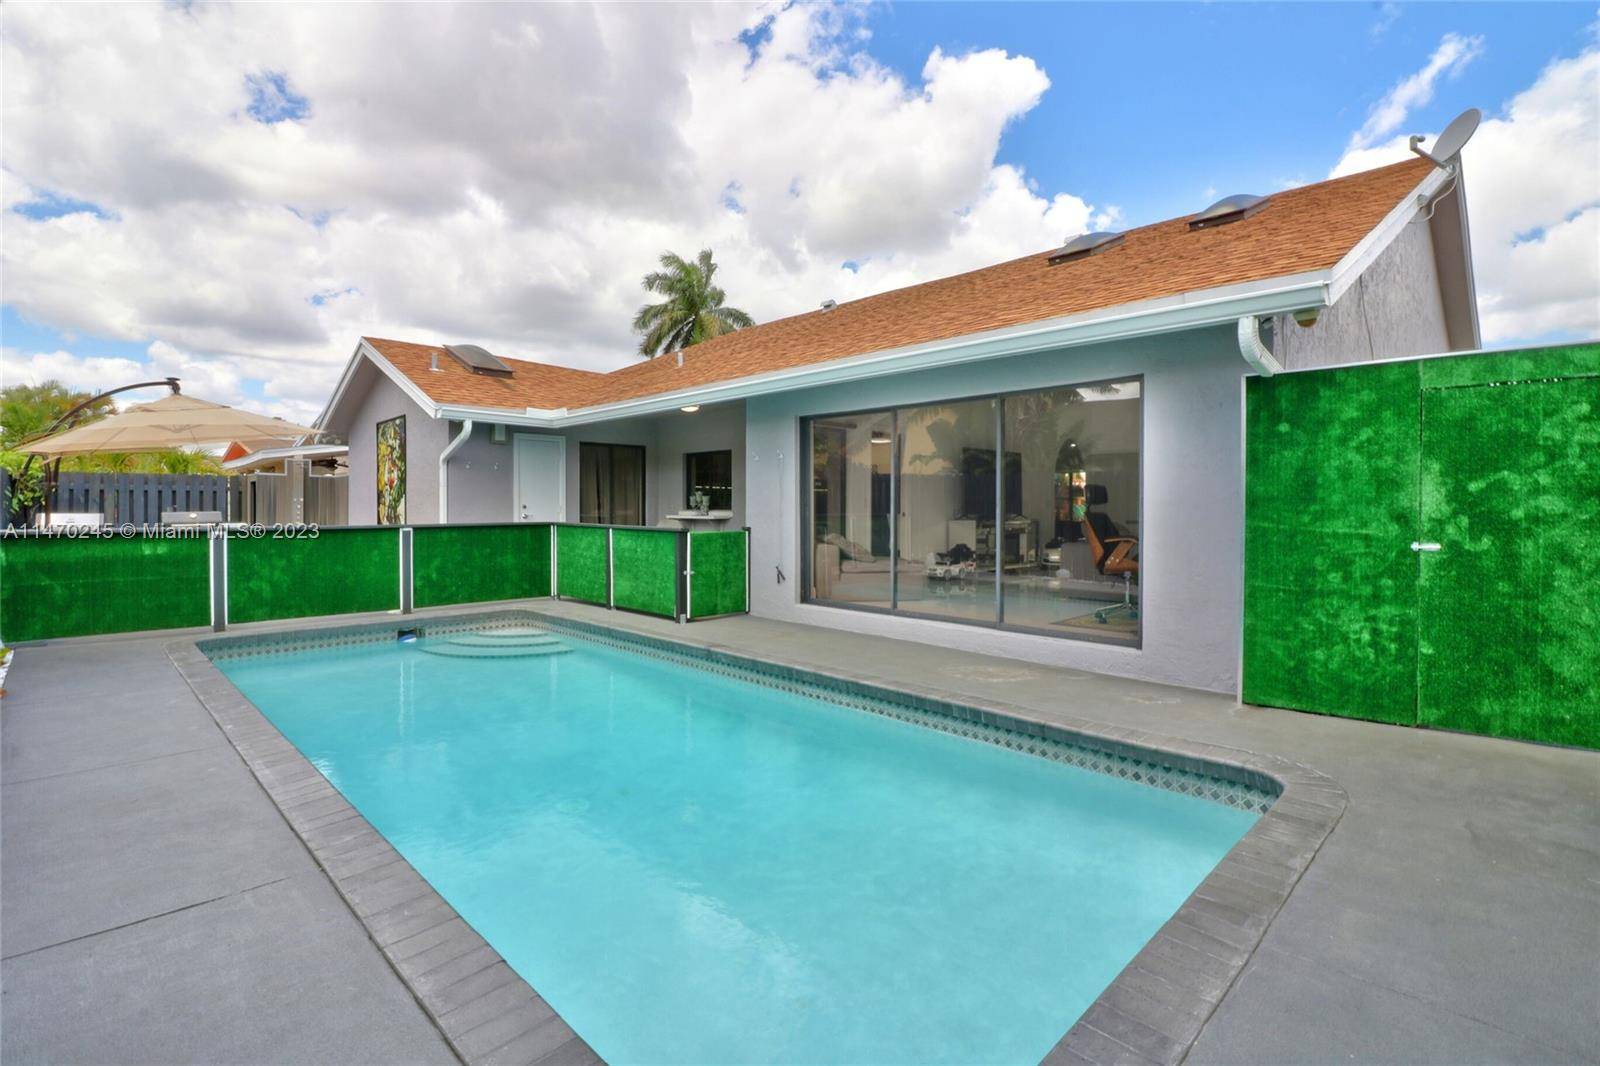 COMPLETELY REMODELED, BEAUTIFULLY FURNISHED, SPACIOUS 3 2 HOUSE WITH THE HEATED SWIMMING POOL.